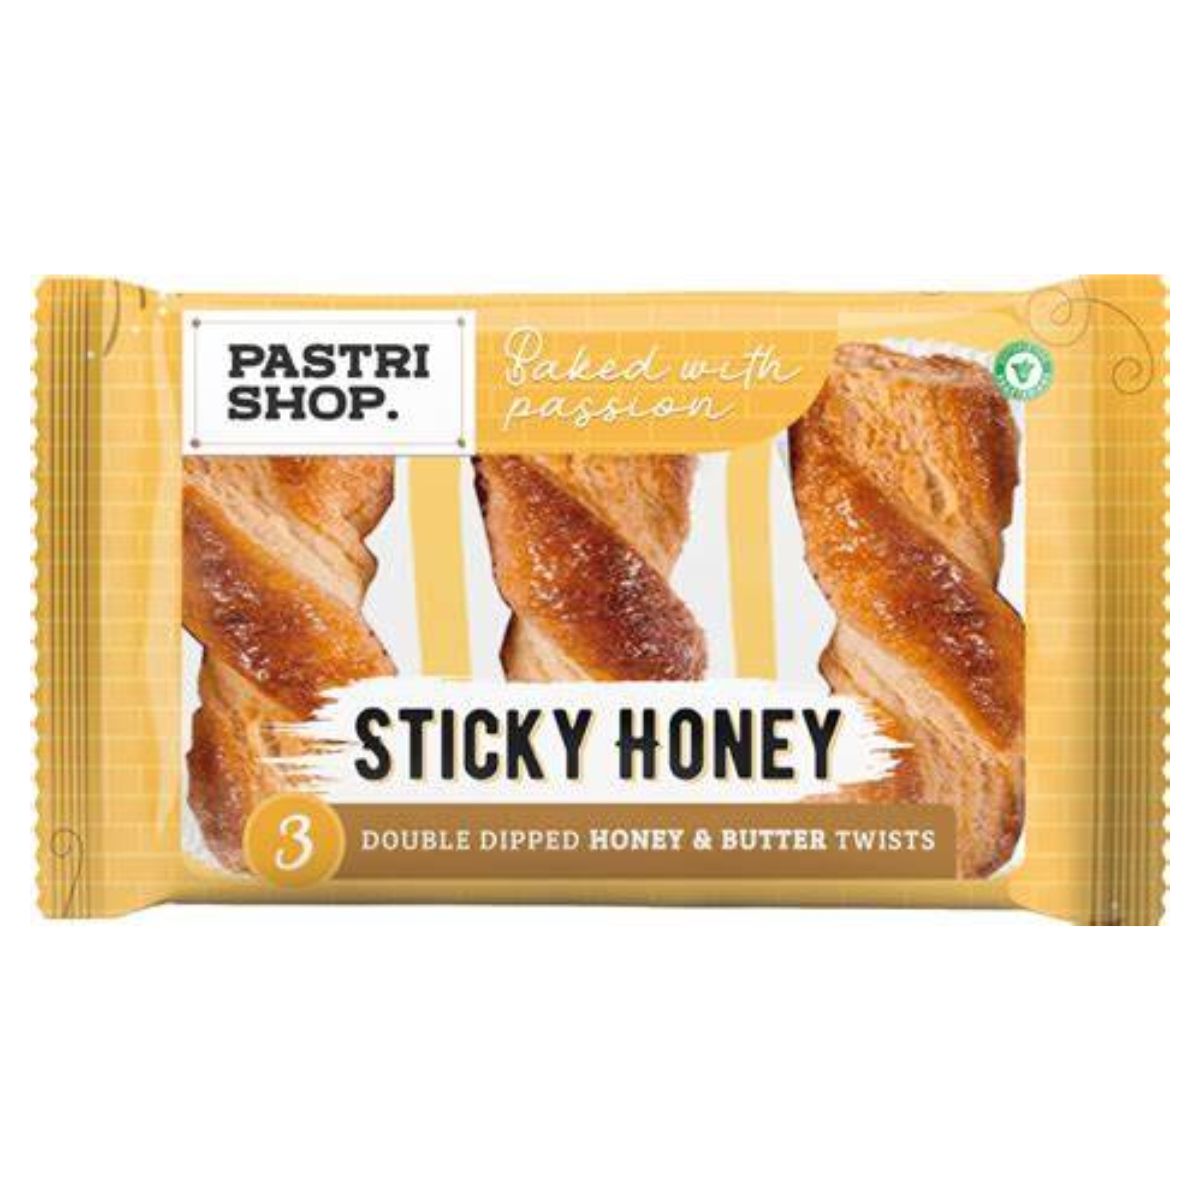 Pastry shop sticky honey double dipped honey & butter twists - 3 pcs.